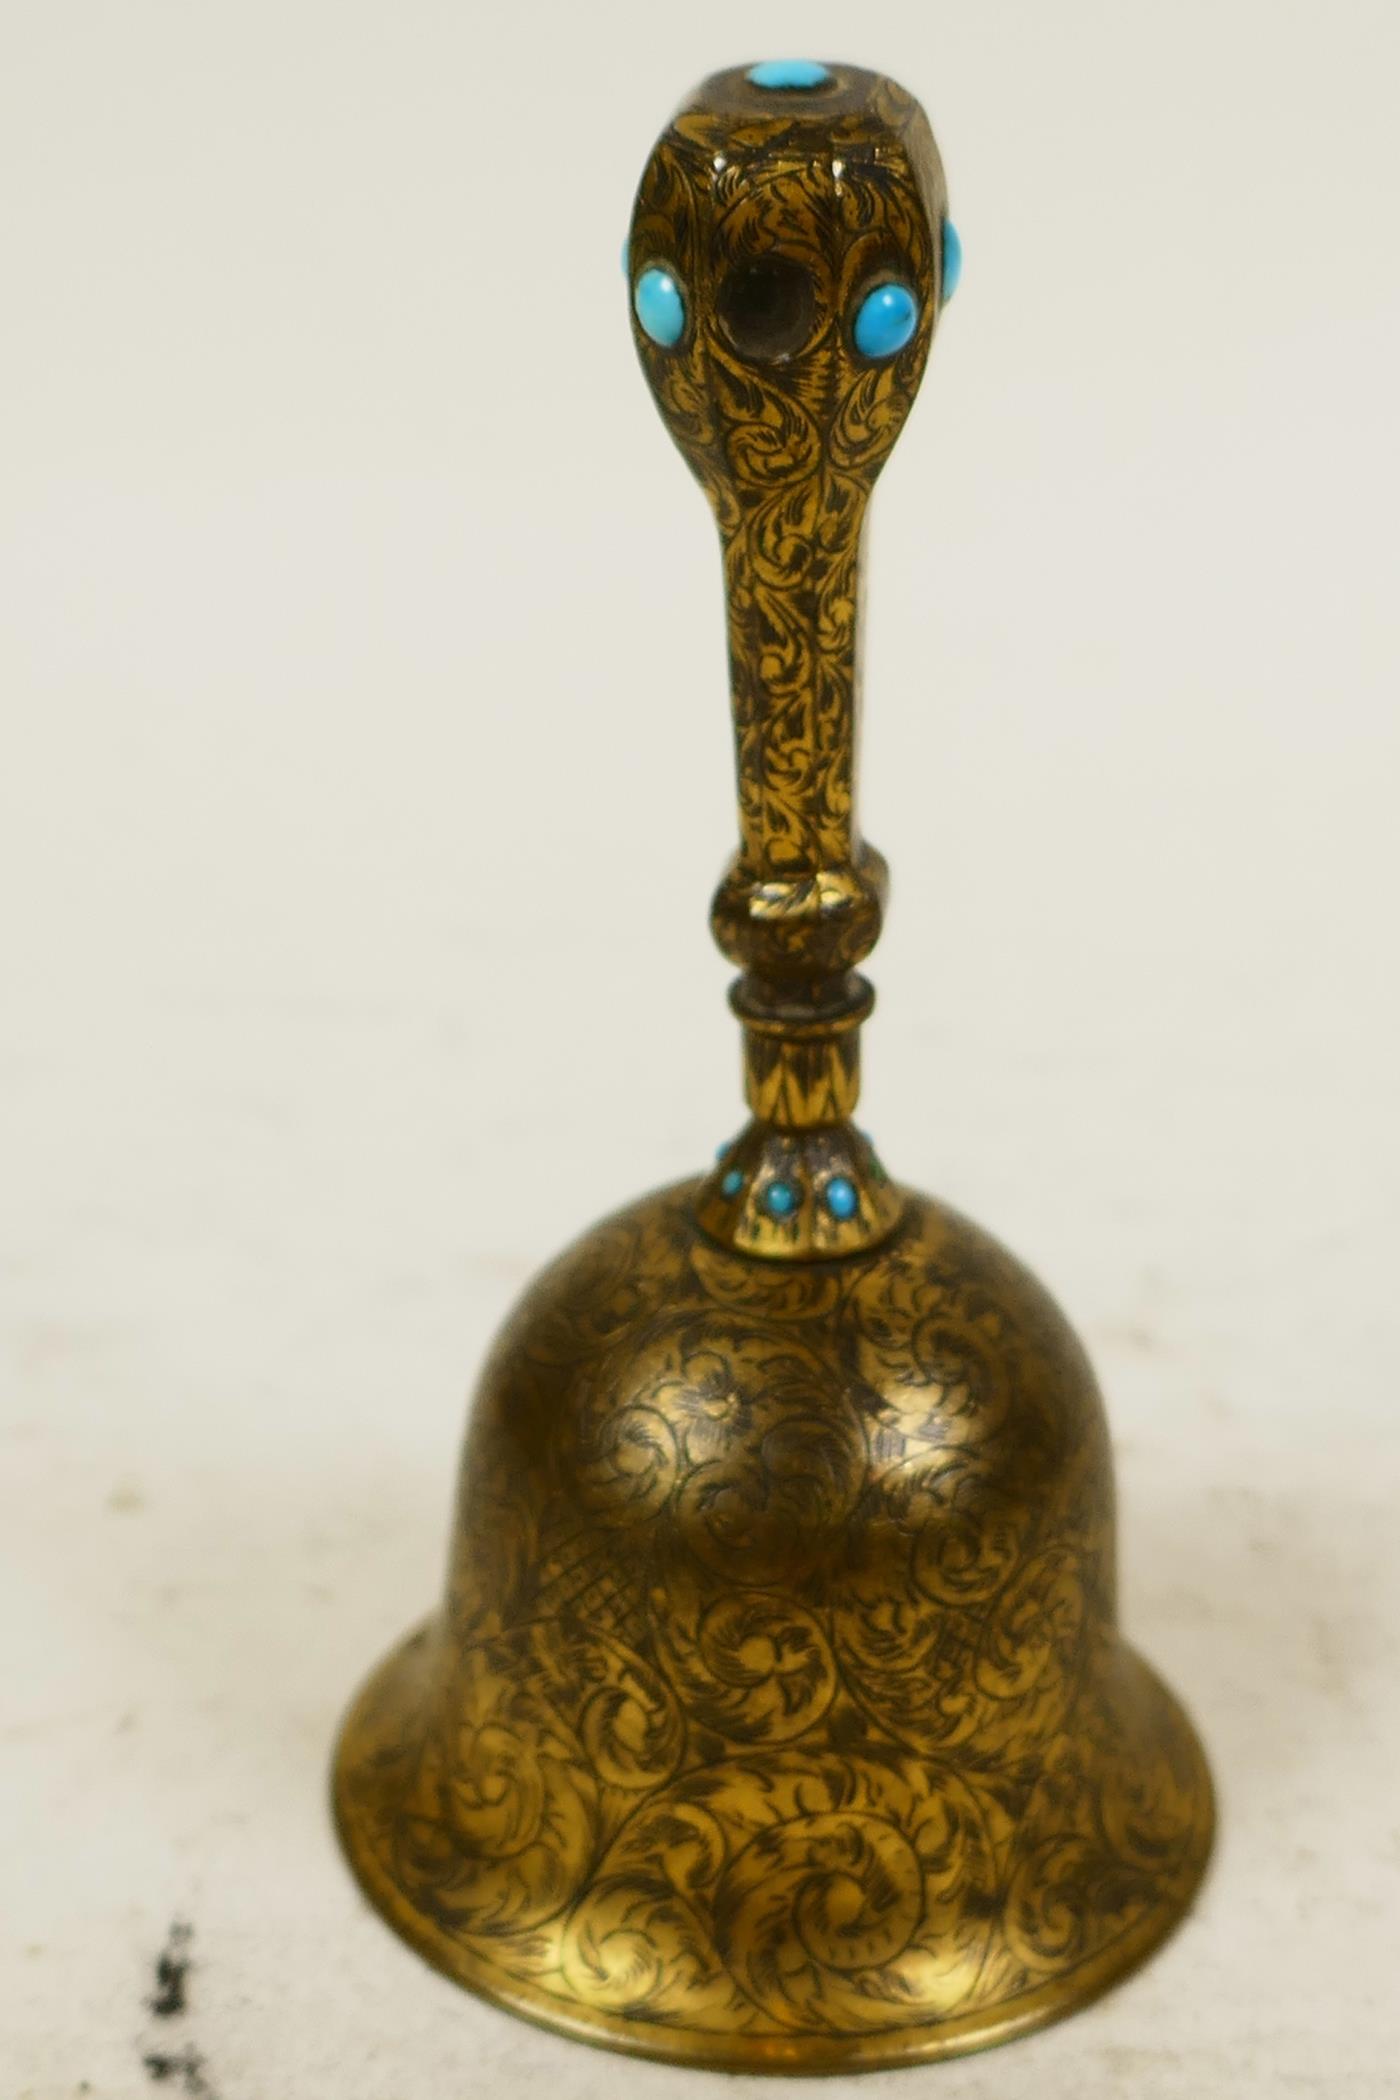 A small Oriental brass table bell with engraved floral decoration and inset with turquoise beads, 4" - Image 3 of 3